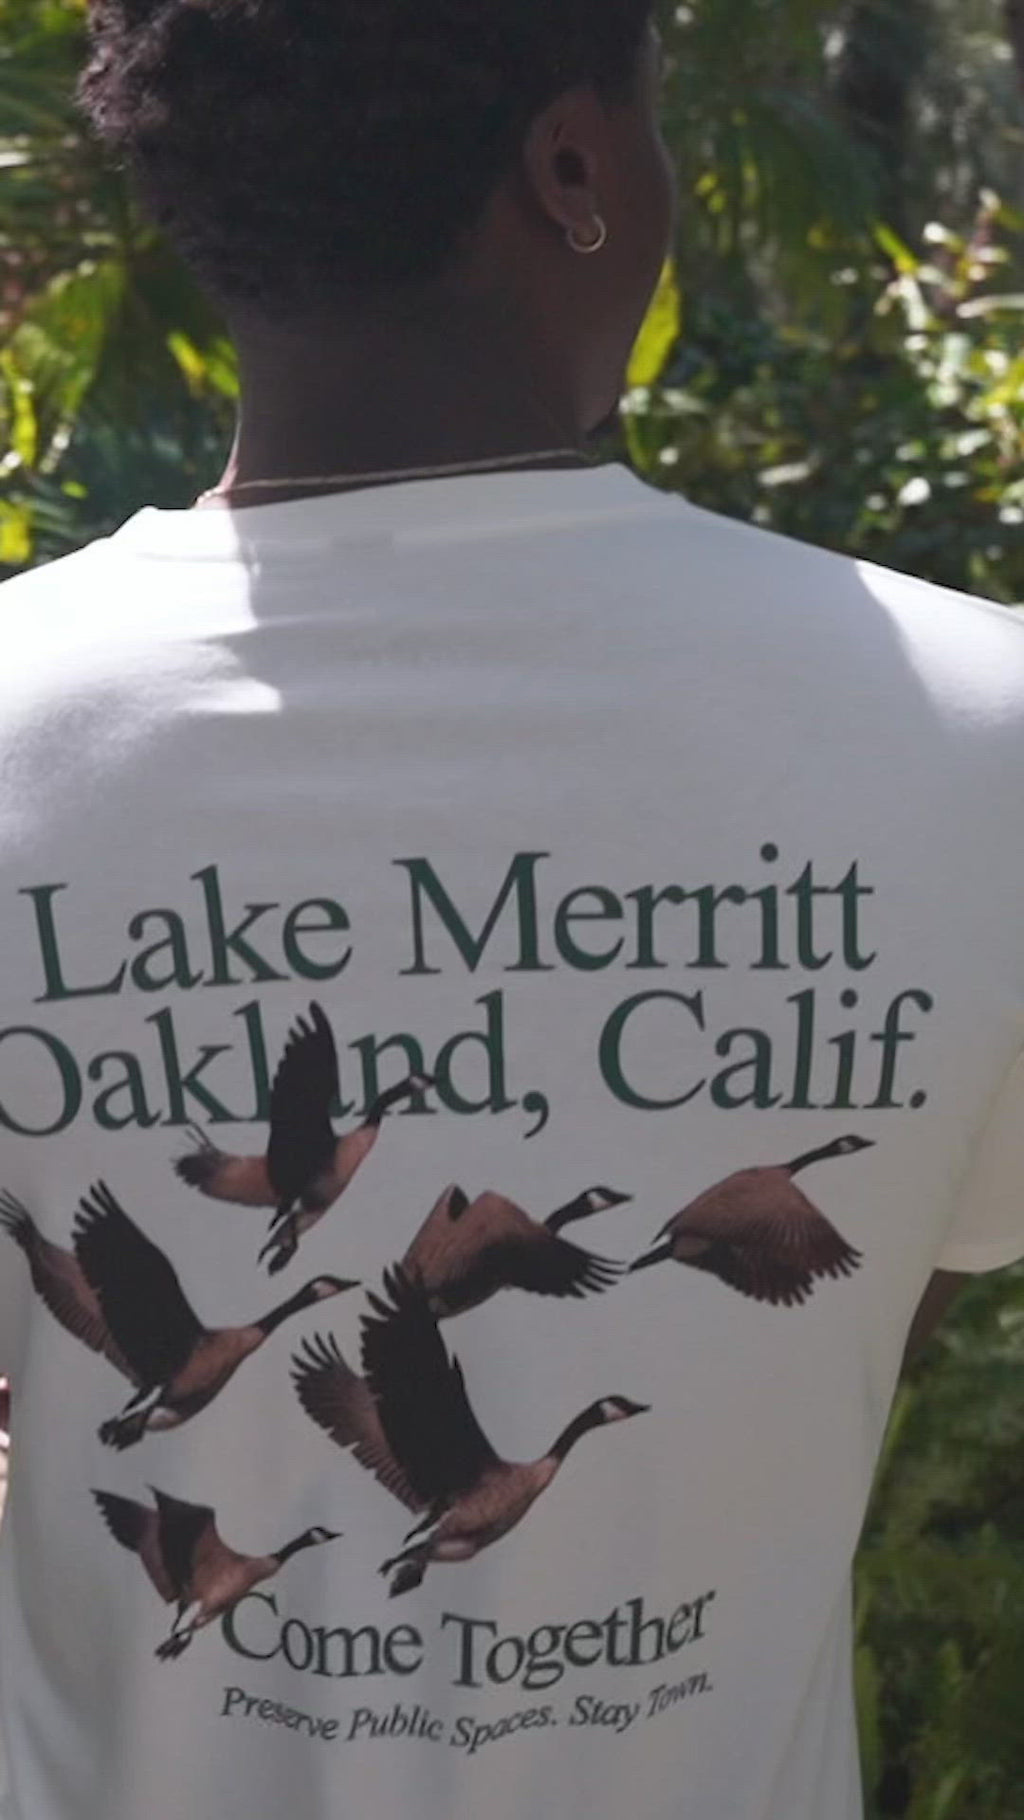 Man and woman walking in park wearing “Lake Merrit Oakland Calif. Come together” t-shirt.